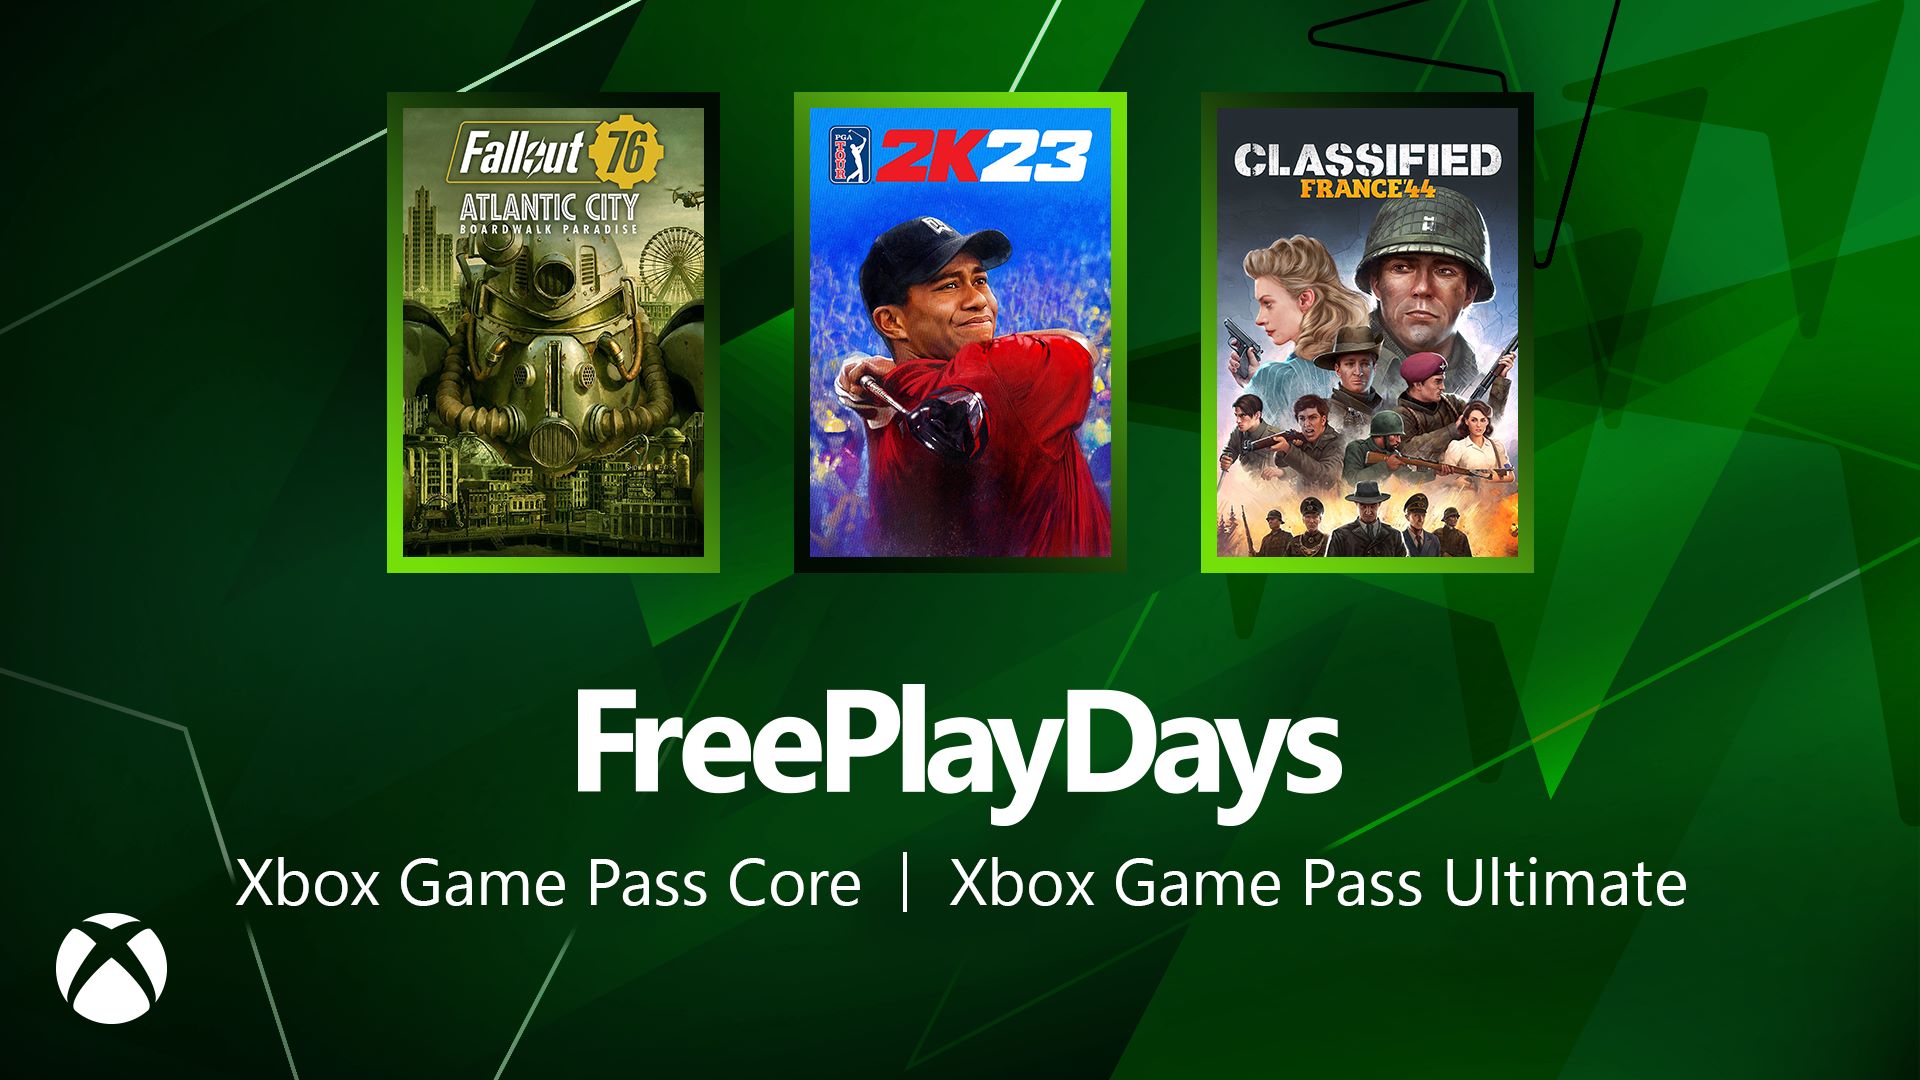 Free Play Days – Fallout 76, PGA Tour 2K23 and Classified France ‘44